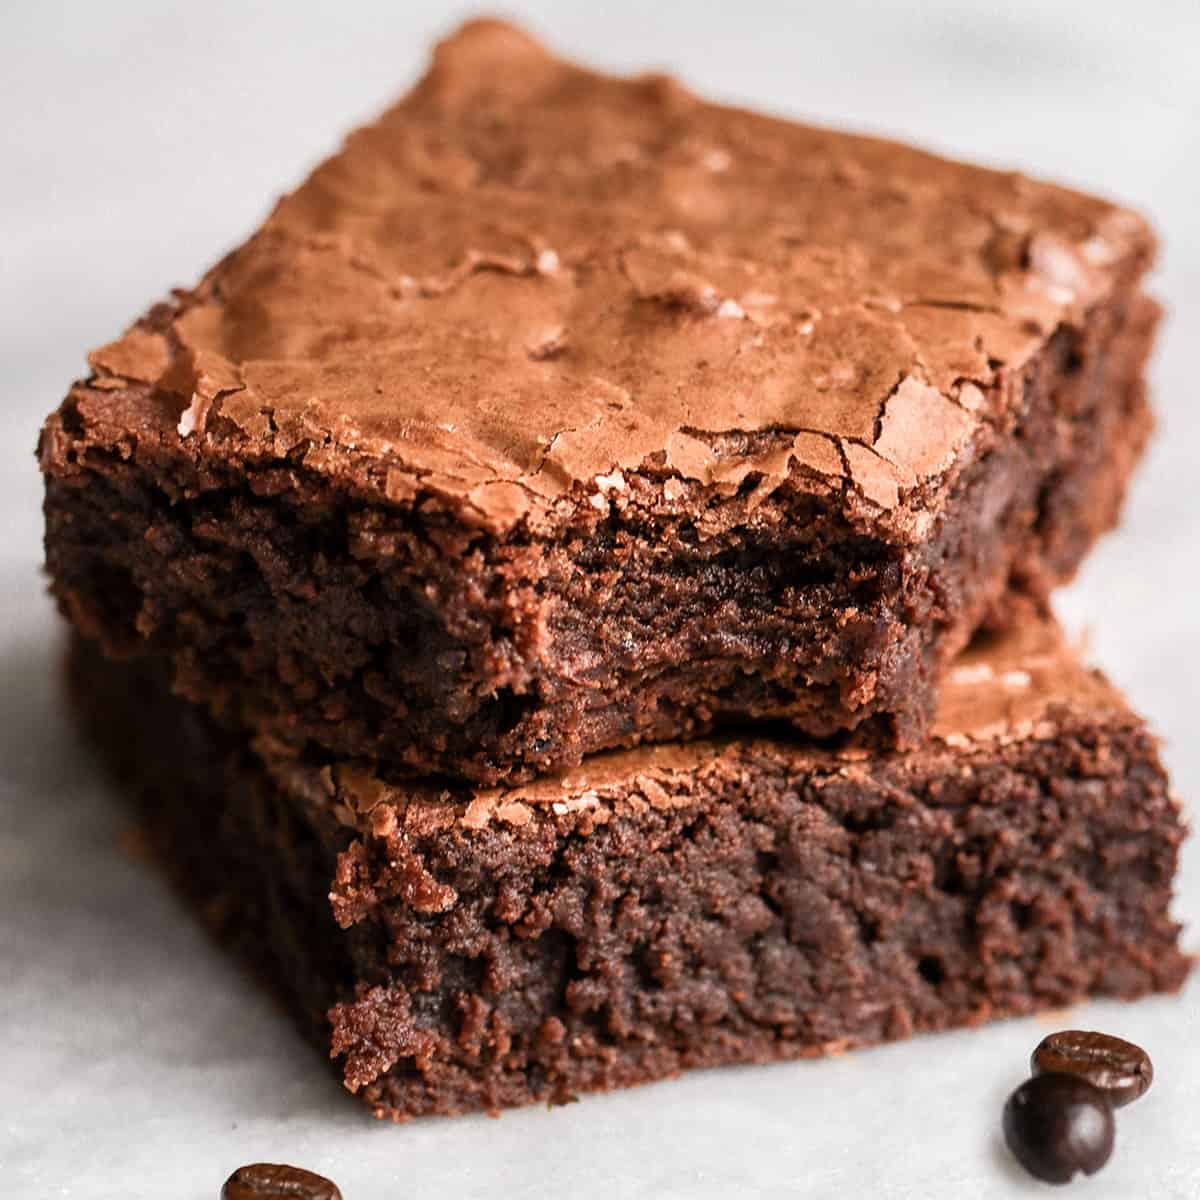 a stack of 2 Coffee Brownies, top one has a bite taken out of it